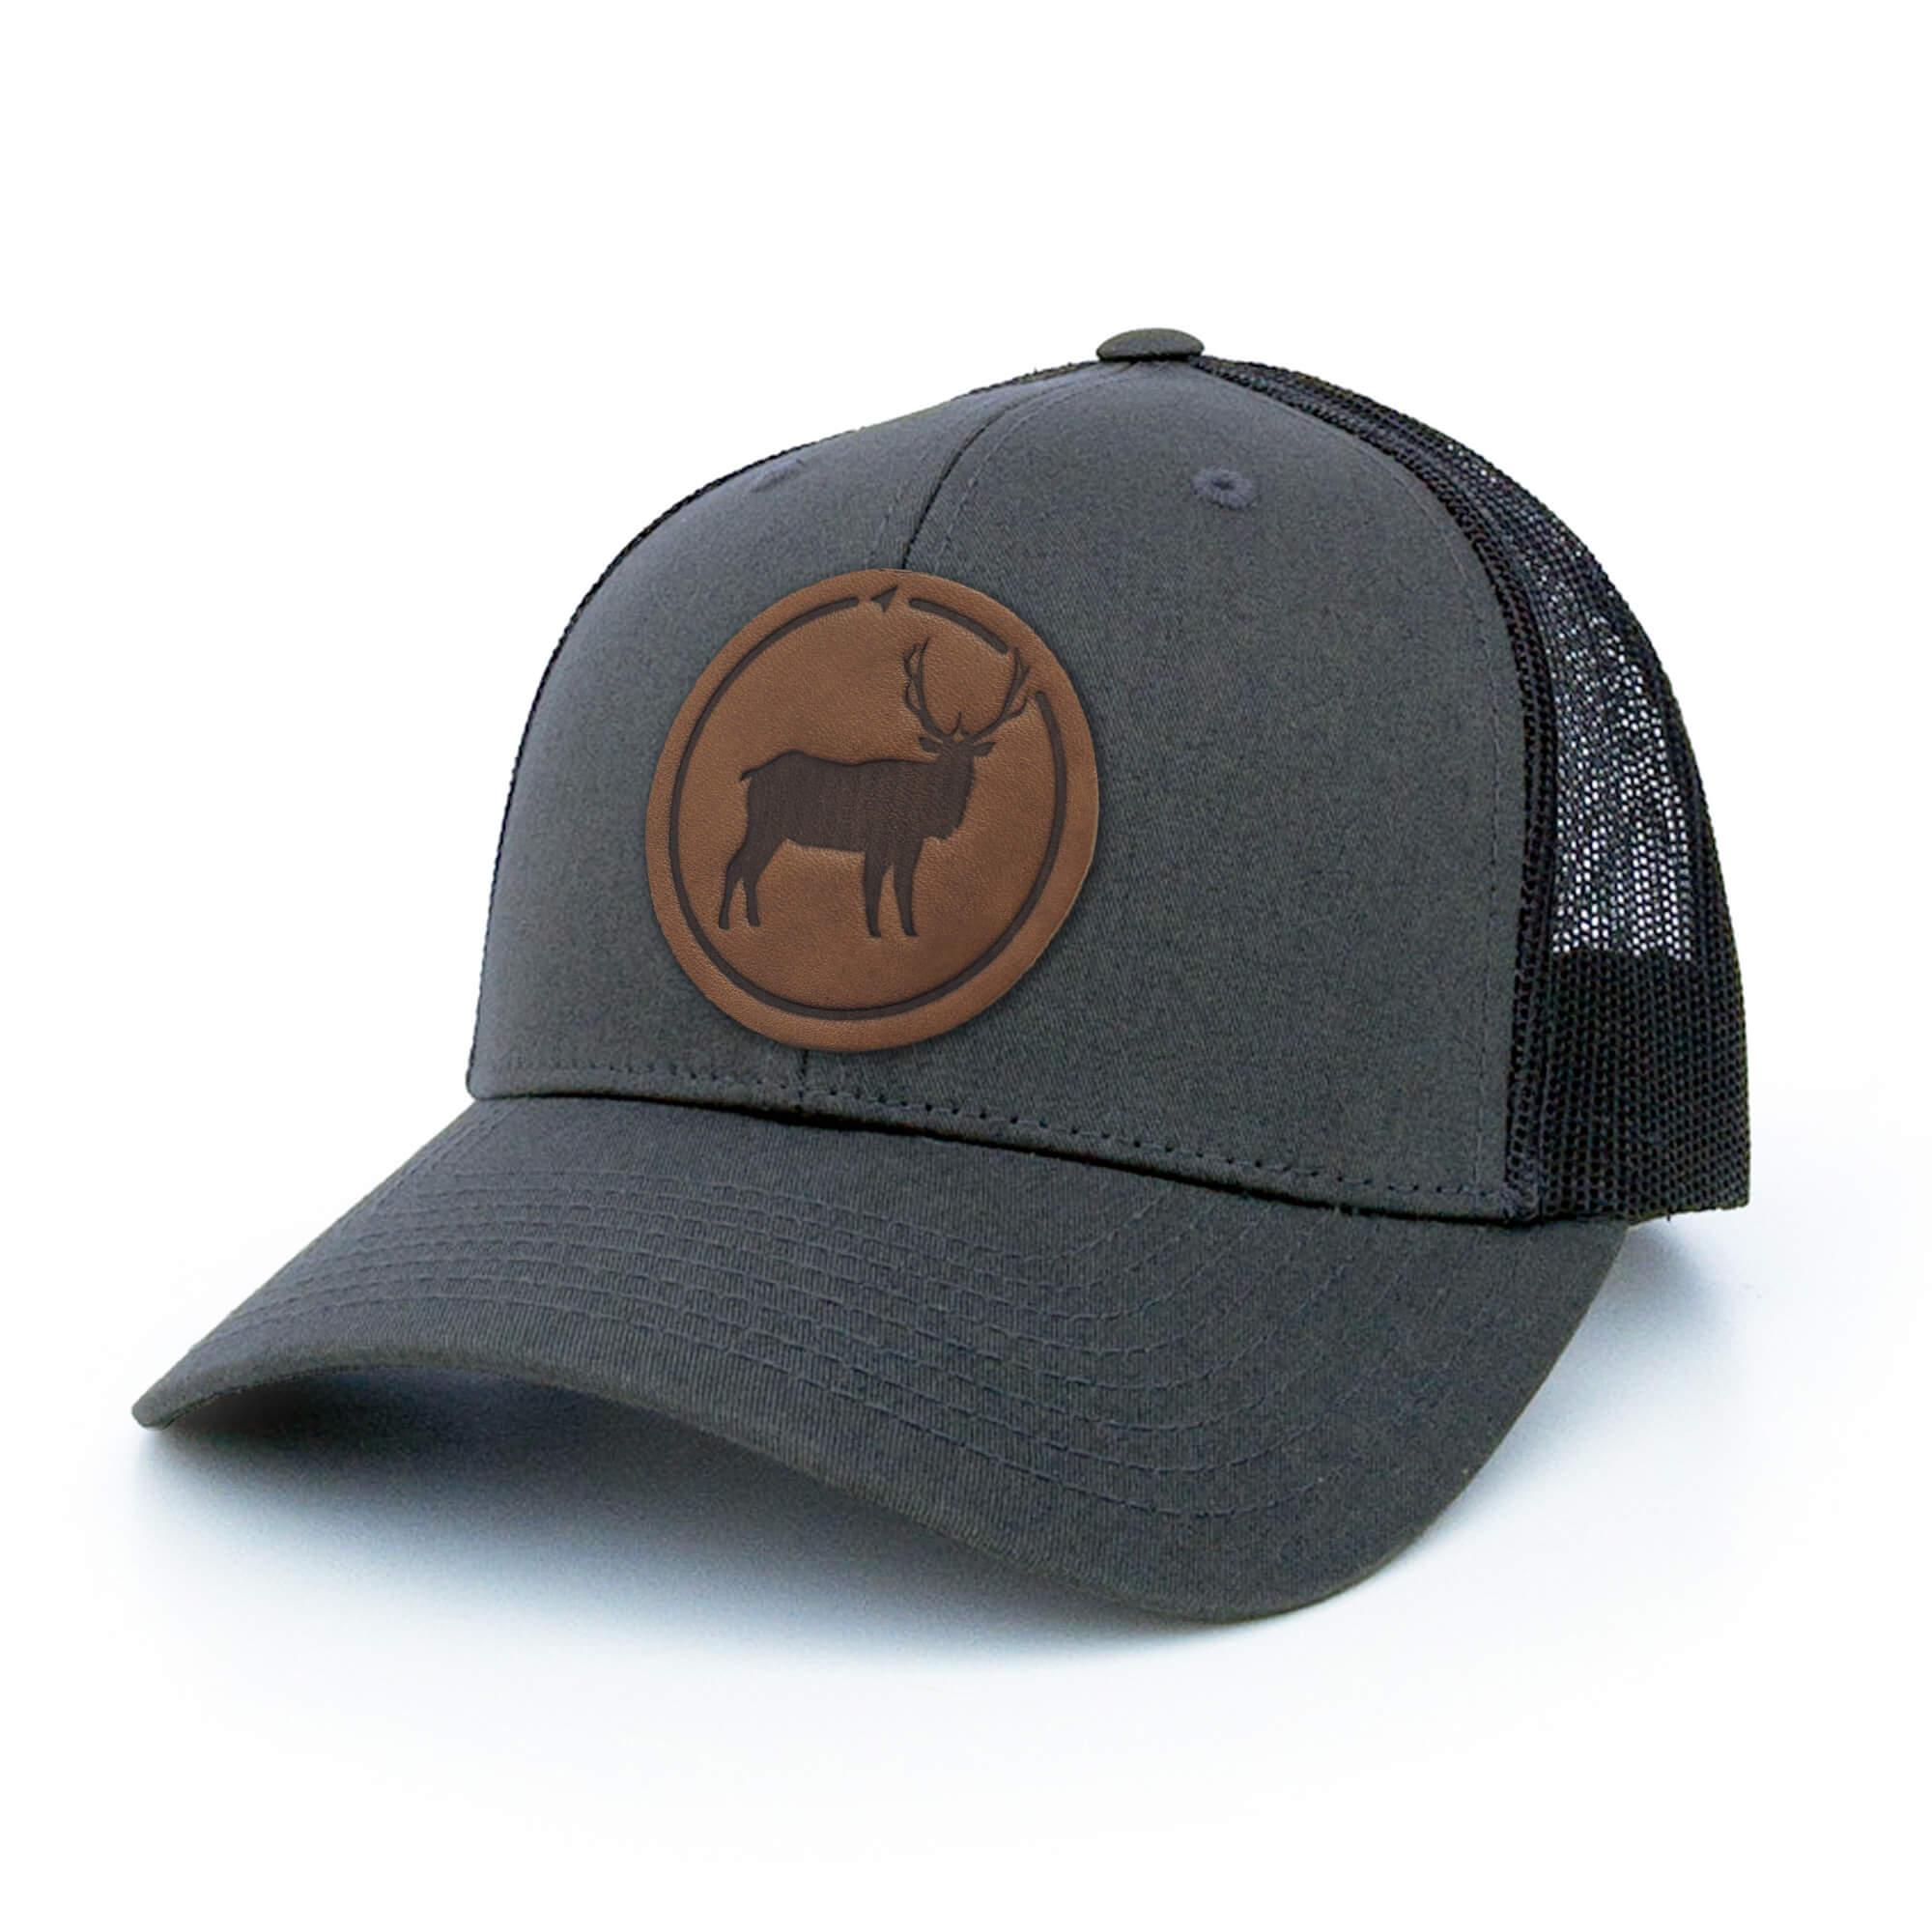 Charcoal trucker hat with full-grain leather patch of Elk | BLACK-004-006, CHARC-004-006, NAVY-004-006, HGREY-004-006, MOSS-004-006, BROWN-004-006